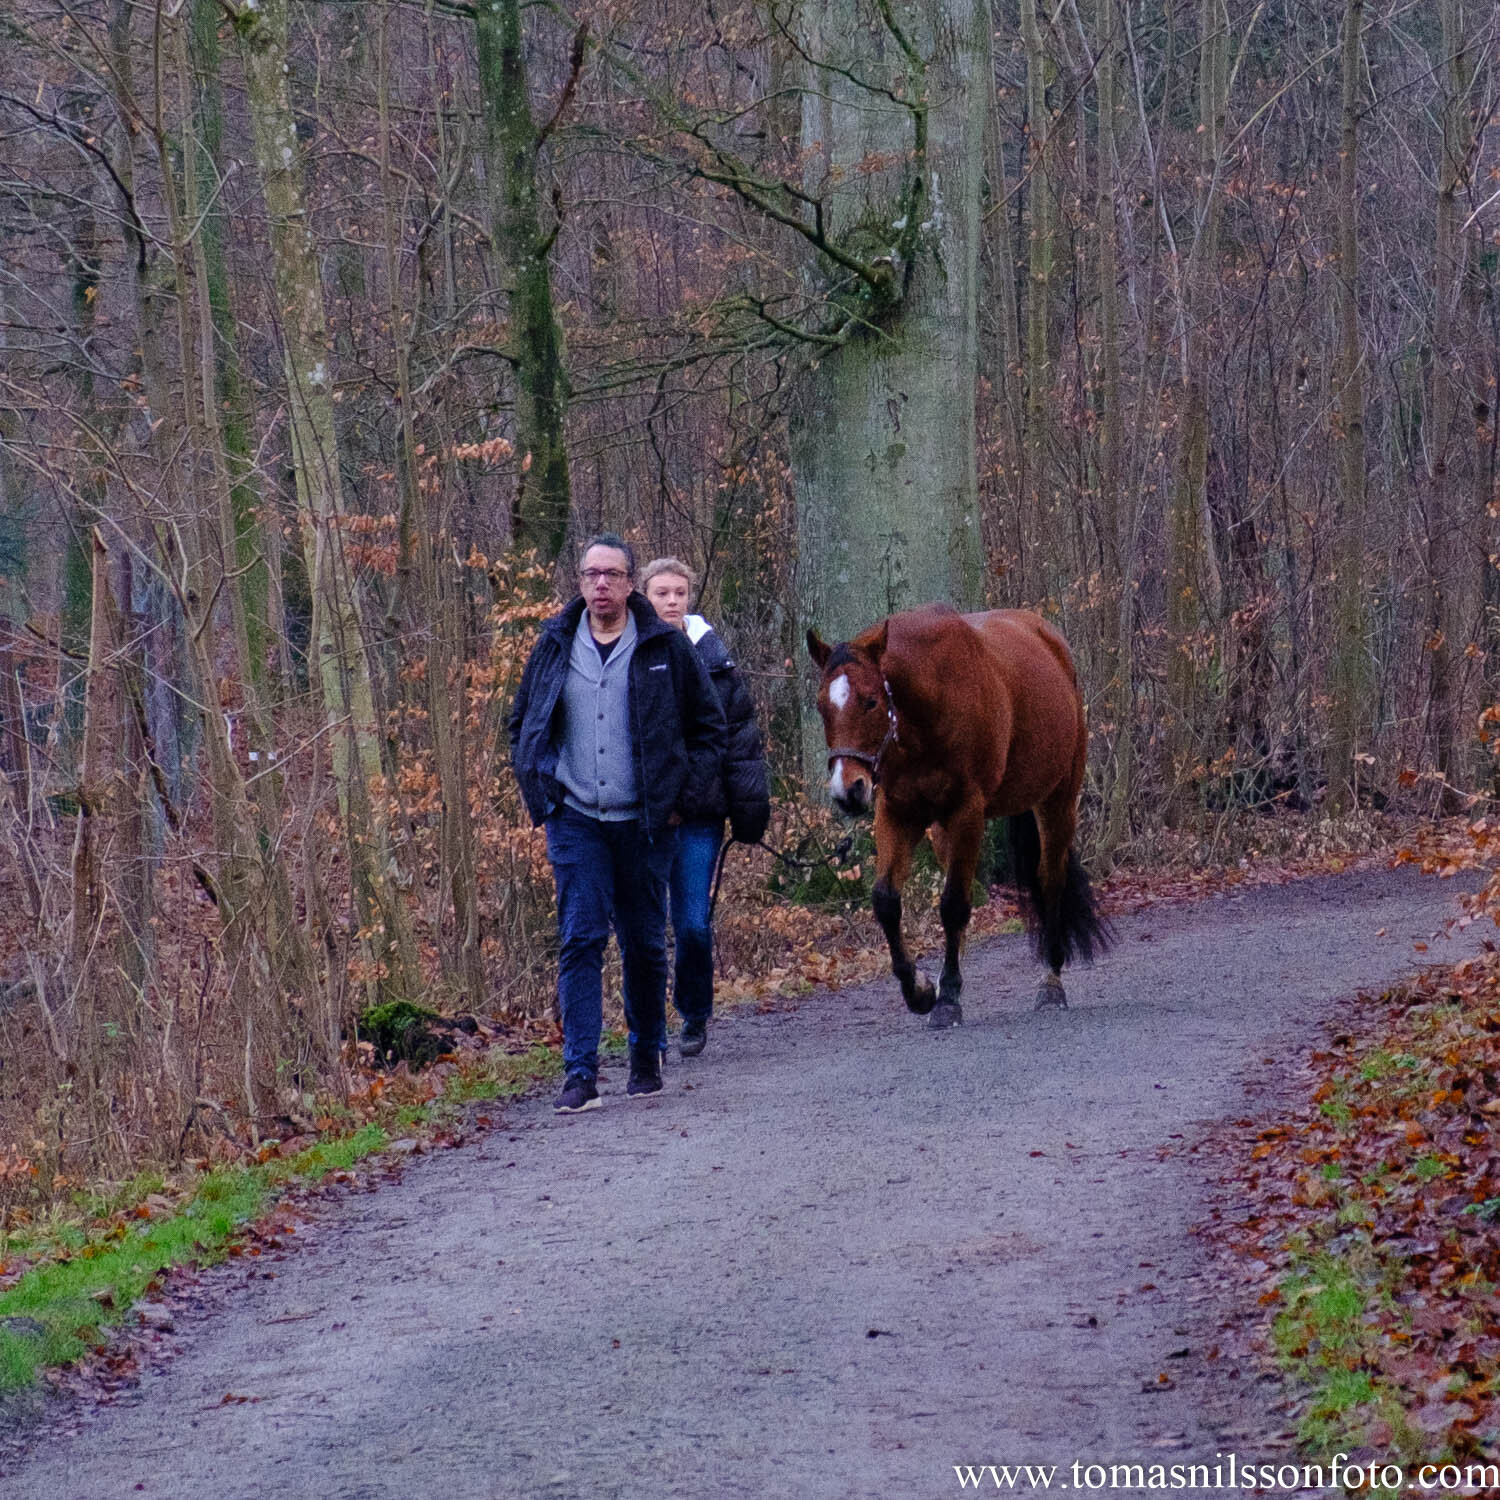 Day 354 - December 19: Taking your pet for a walk